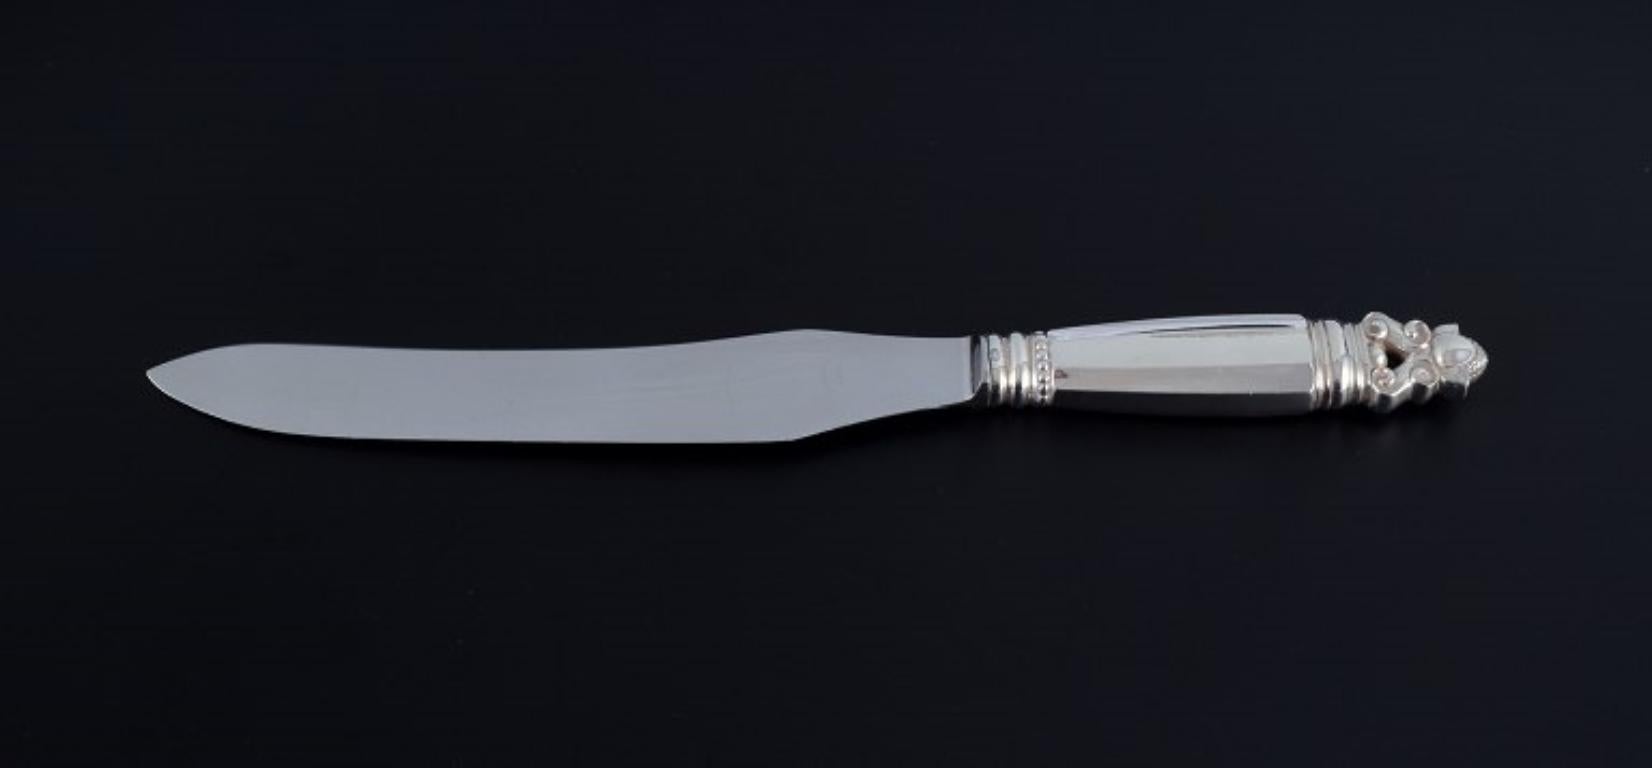 Georg Jensen, Acorn.
Carving set in sterling silver and stainless steel.
Marked with post-1945 marks and British import marks.
In excellent condition.
Knife: L 31.8 cm.